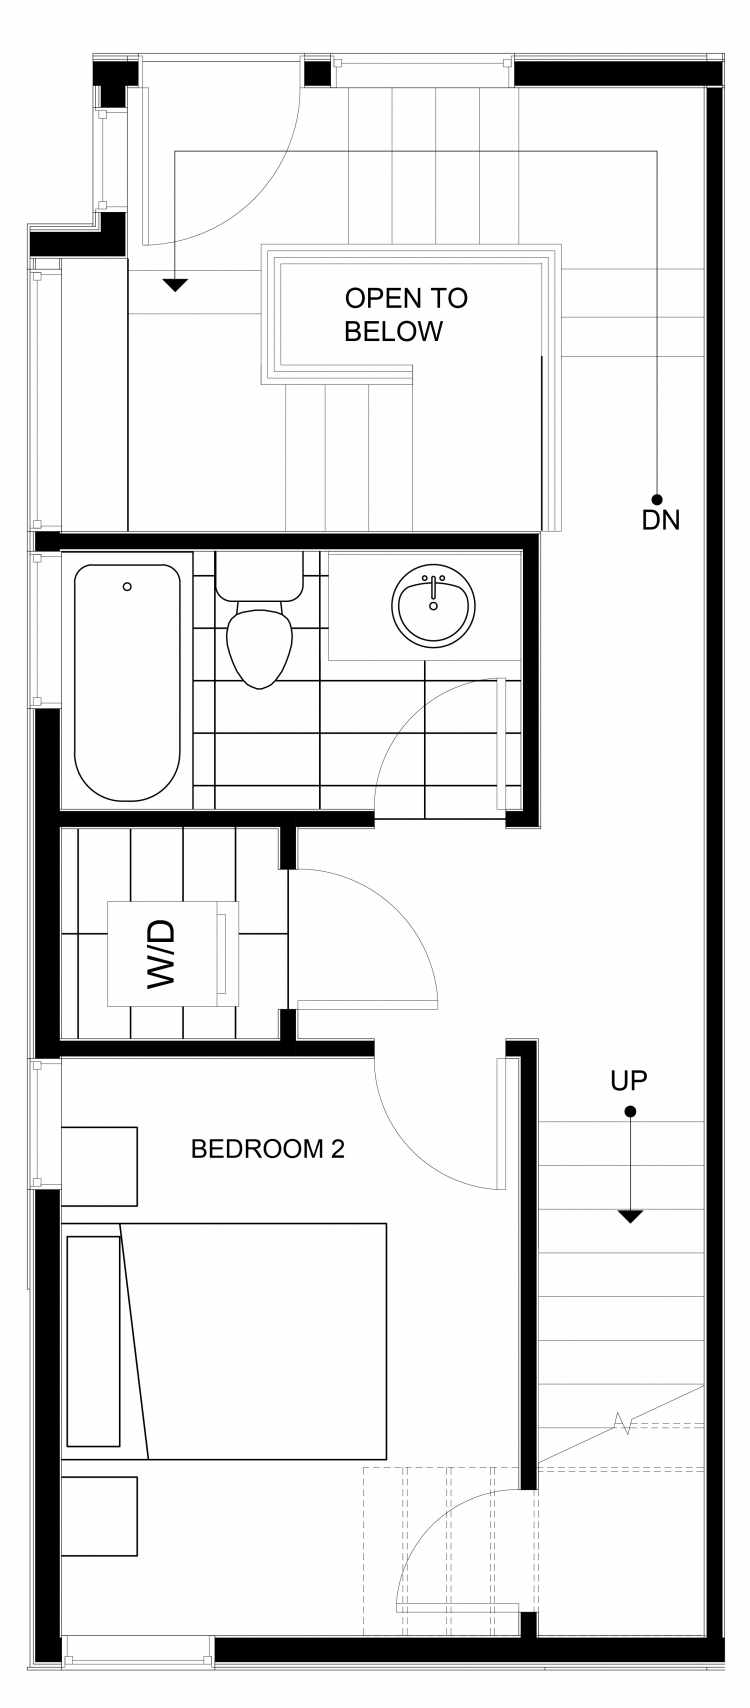 Second Floor Plan of 1543 Grandview Pl E, One of the Larrabee Townhomes in Capitol Hill